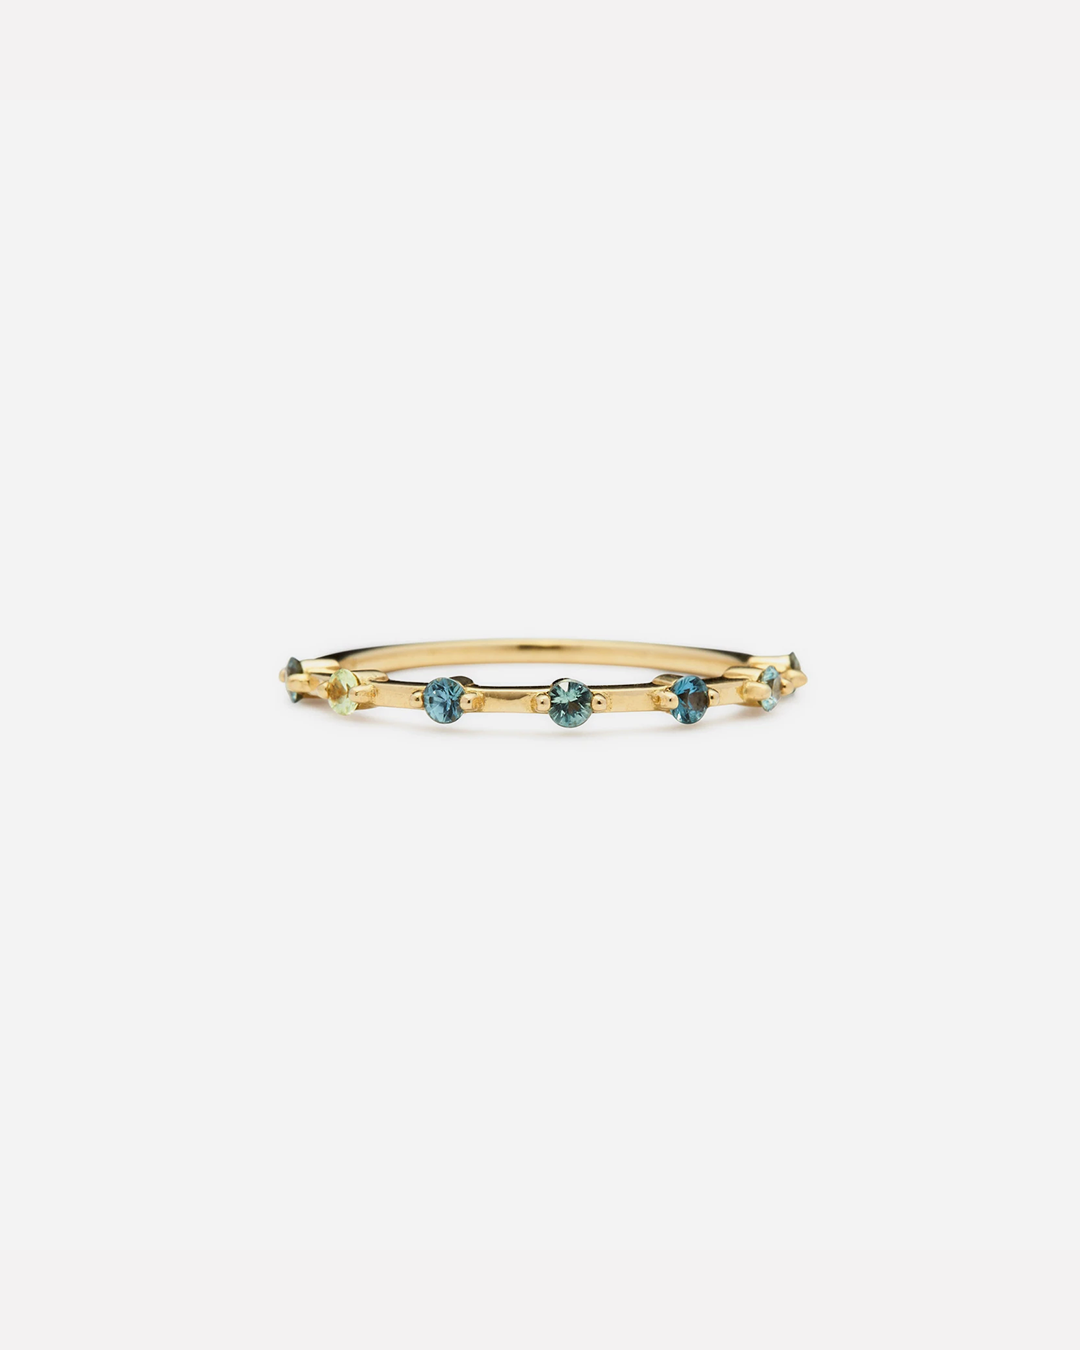 Dash / Gradient Sapphire Band By Casual Seance in Wedding Bands Category